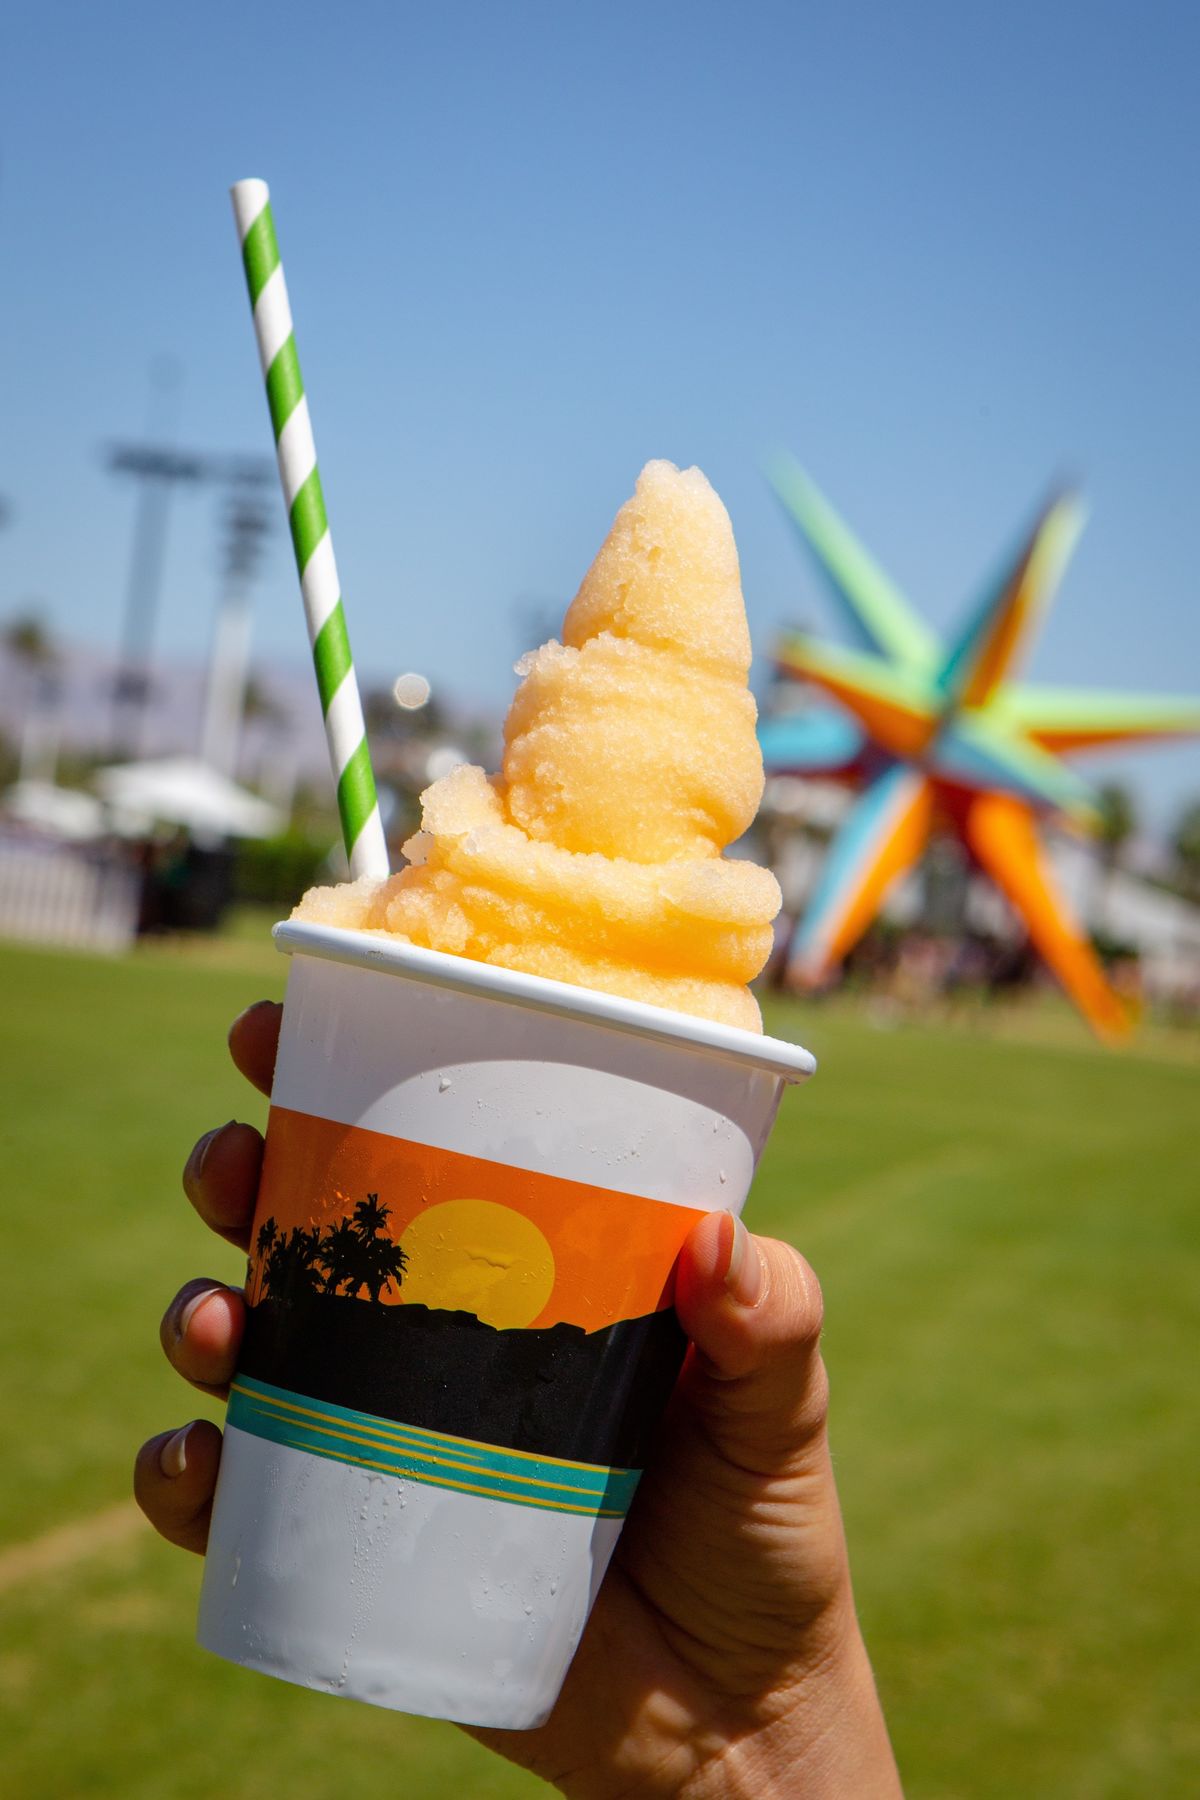 Goldenvoice’s Coachella Music and Arts Festival Phases Out Single-Use Plastic Straws In Favor of Biodegradable Paper Straws. (Photo by Tim Hans)